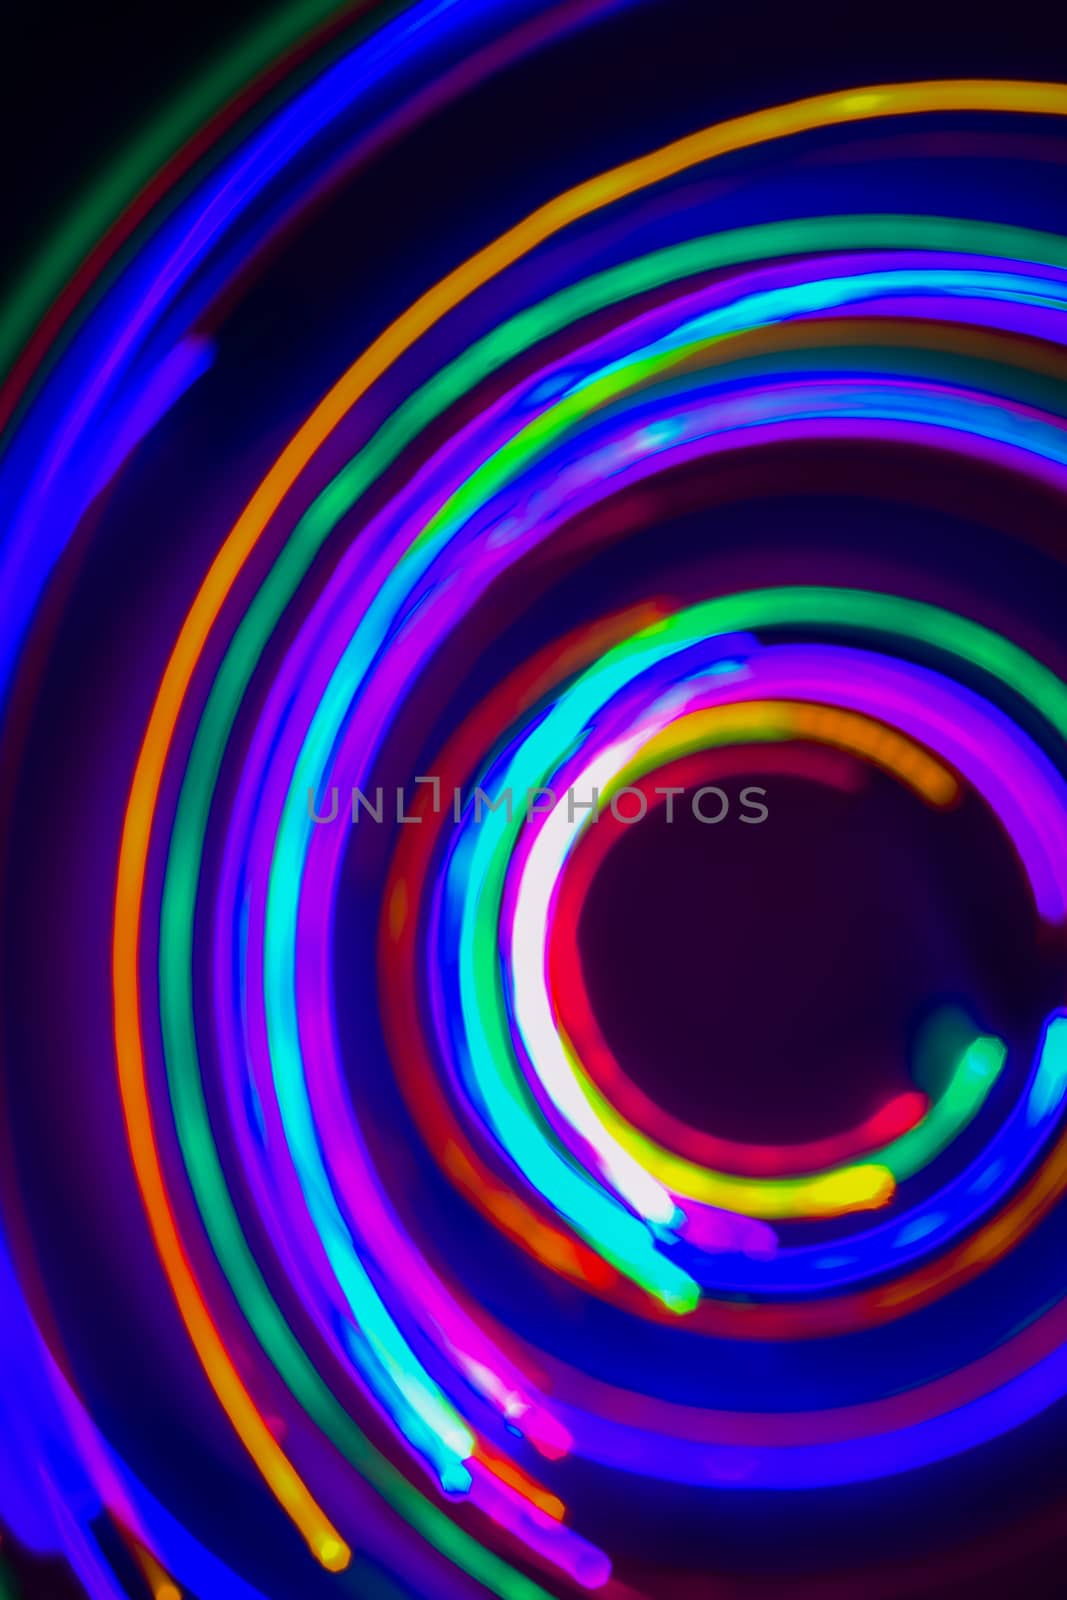 Christmas tree lights spun around to achieve a spiral glowing ef by asafaric